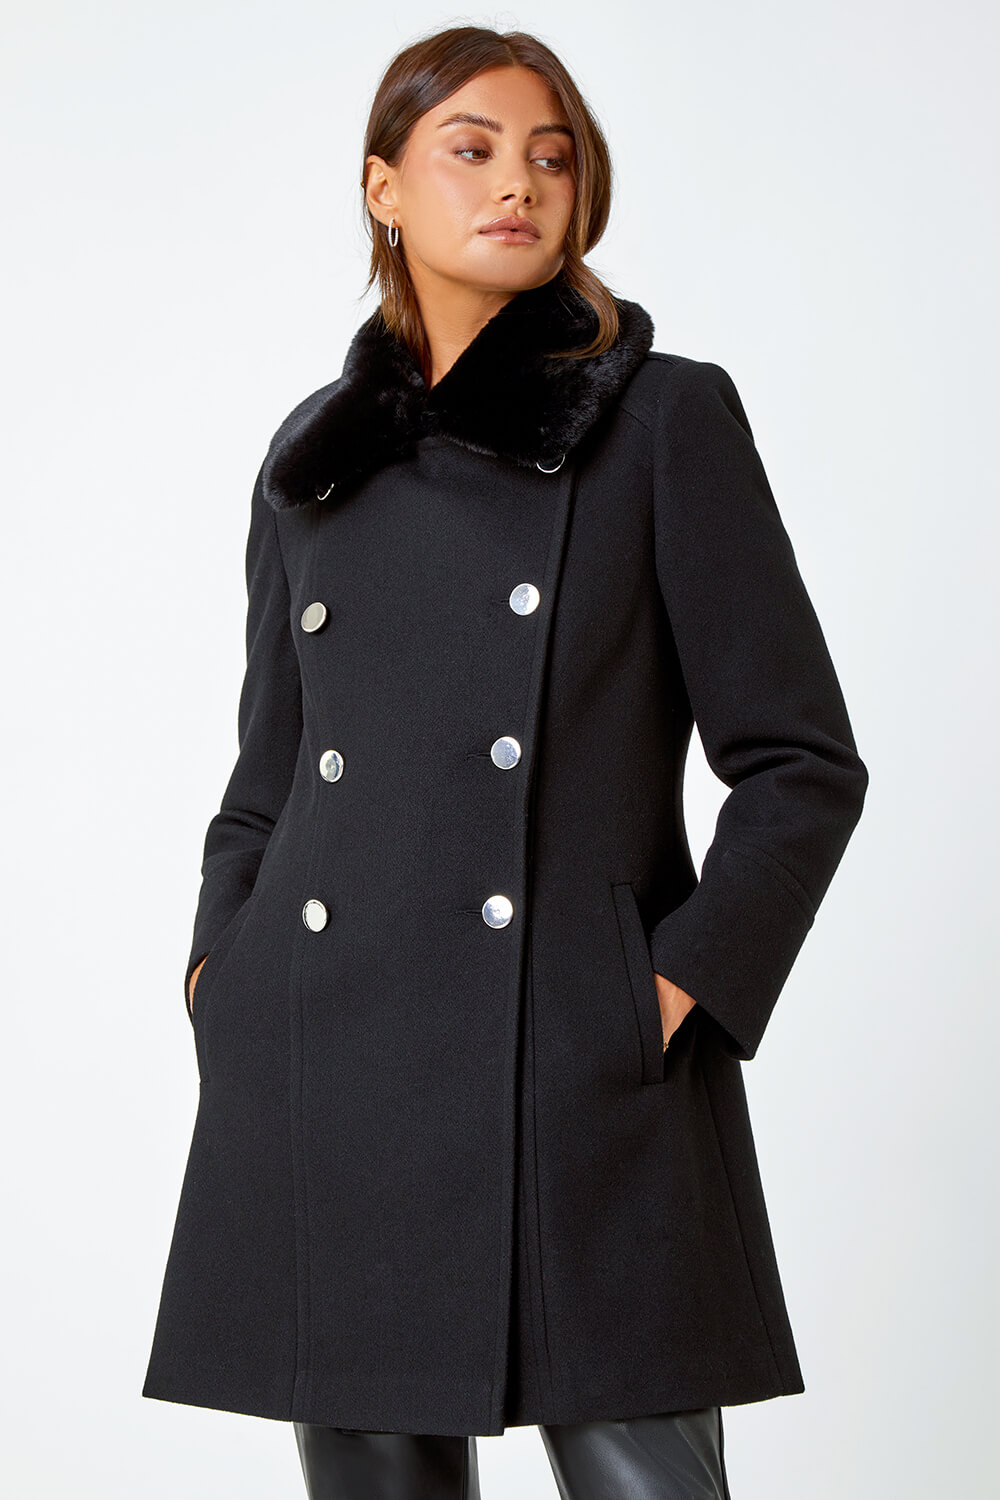 Black Double Breasted Faux Fur Collar Coat, Image 1 of 5